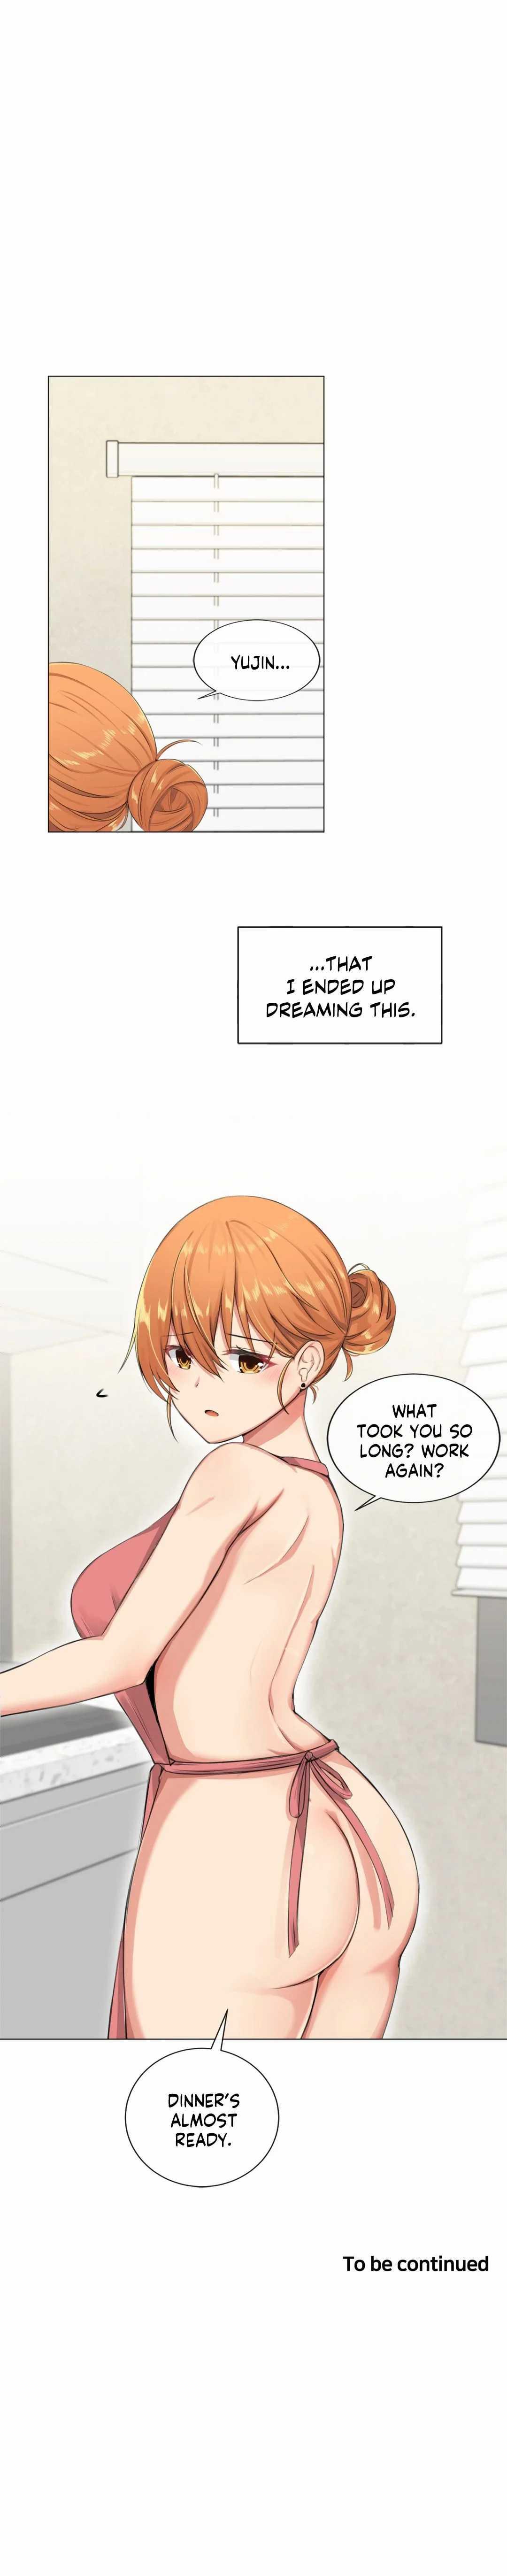 [Dumangoon, 130F] Sexcape Room: Pile Up Ch.9/9 [English] [Manhwa PDF] Completed 110